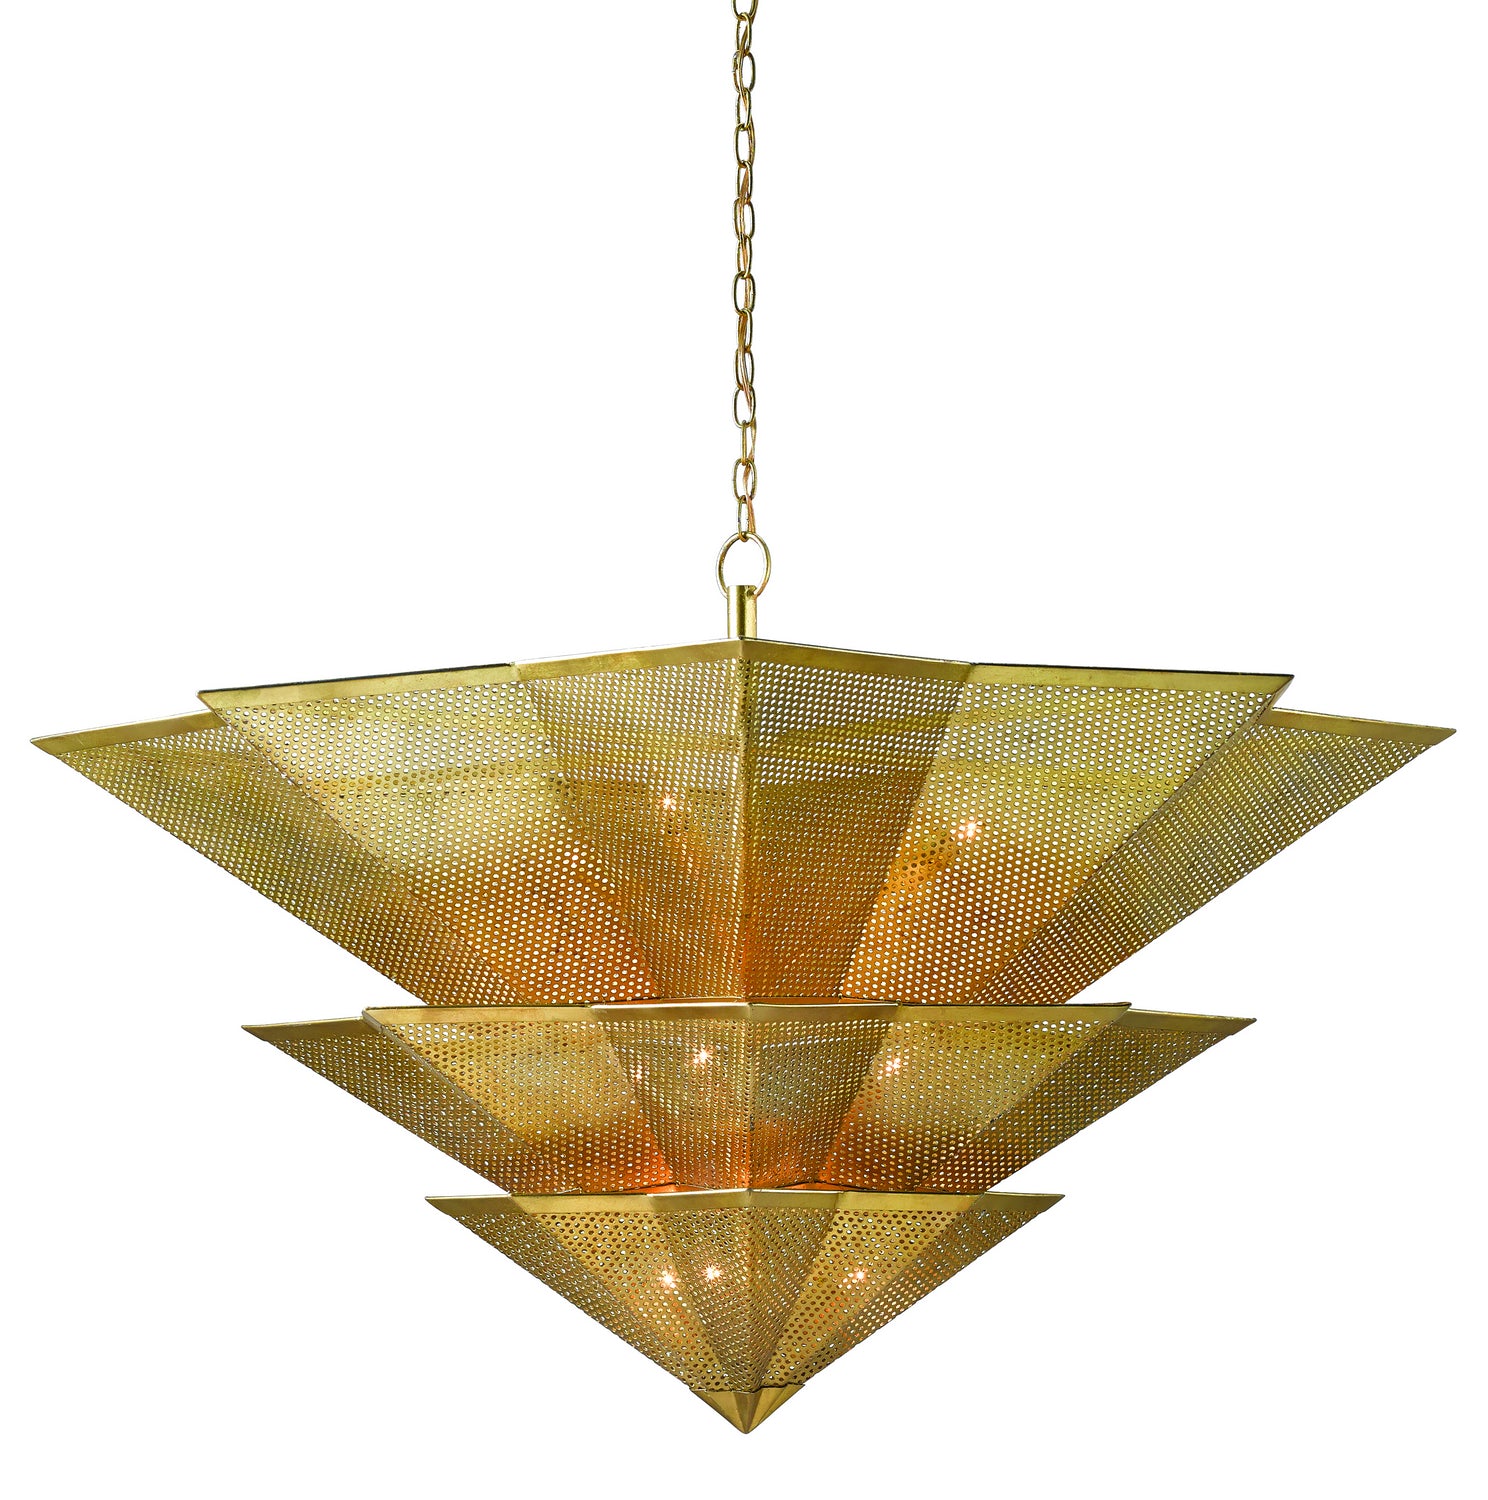 Nine Light Chandelier from the Hanway collection in Antique Gold Leaf finish